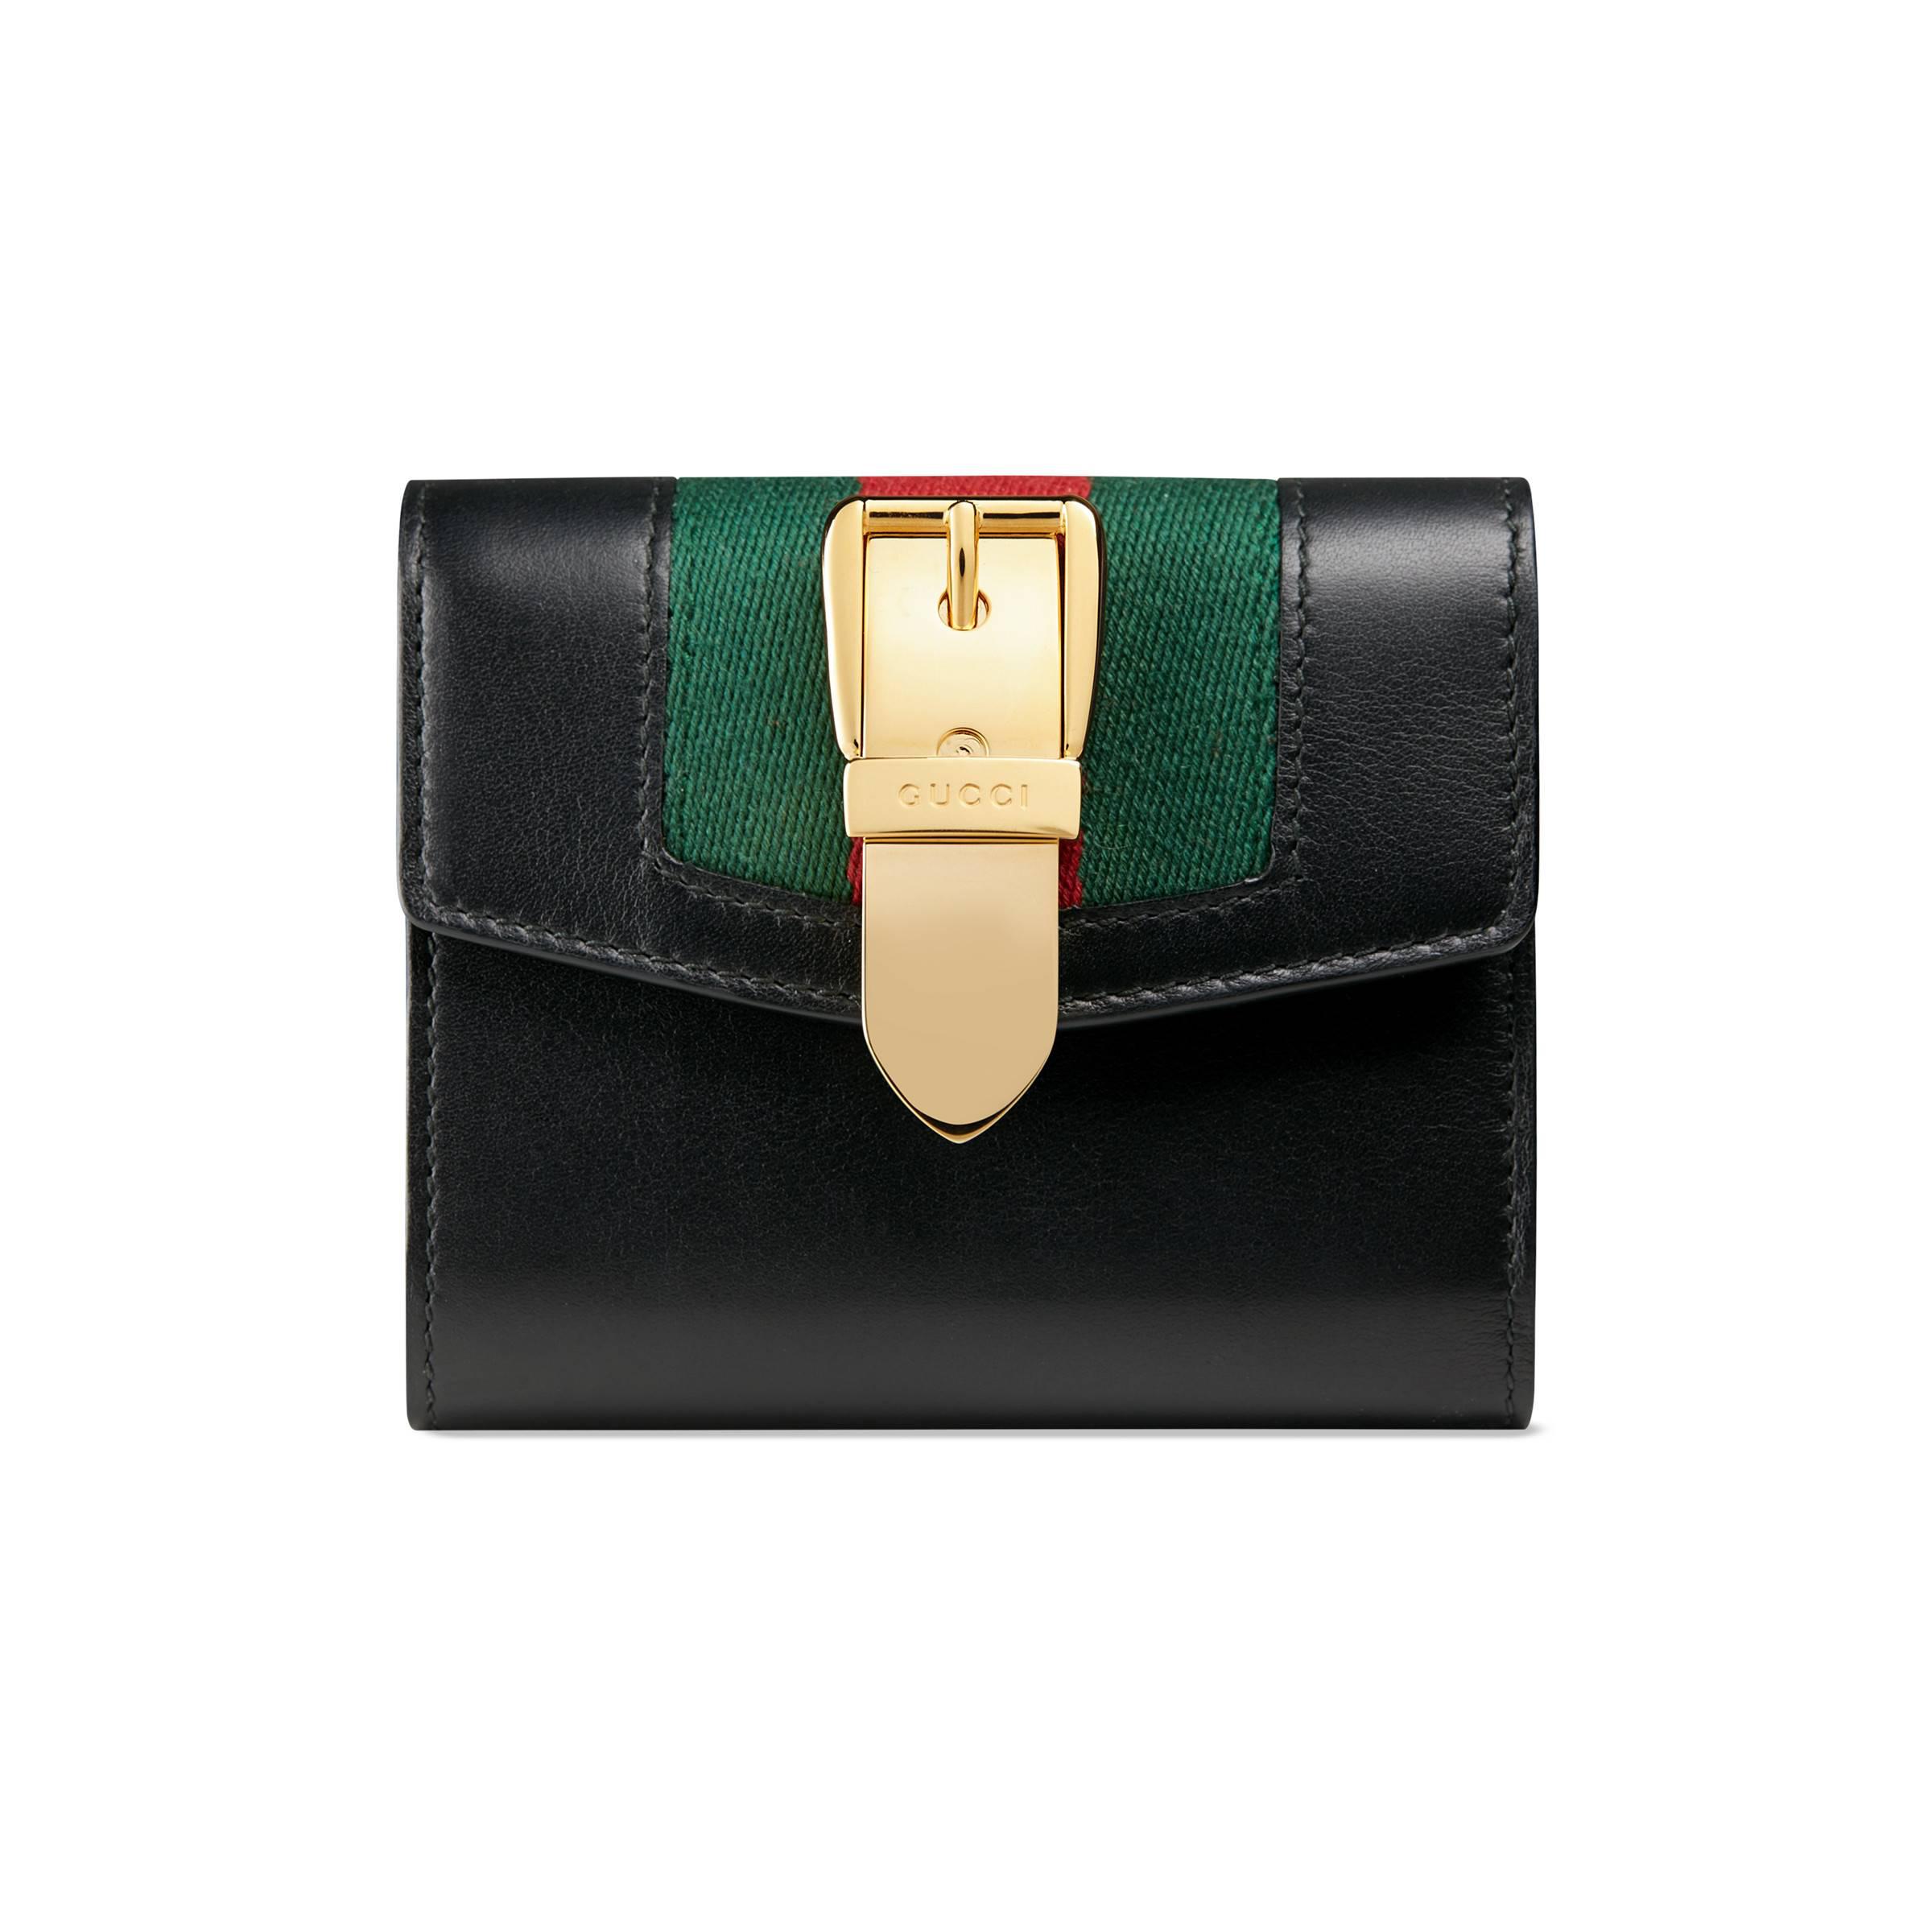 Gucci Sylvie Leather Wallet in Black | Lyst